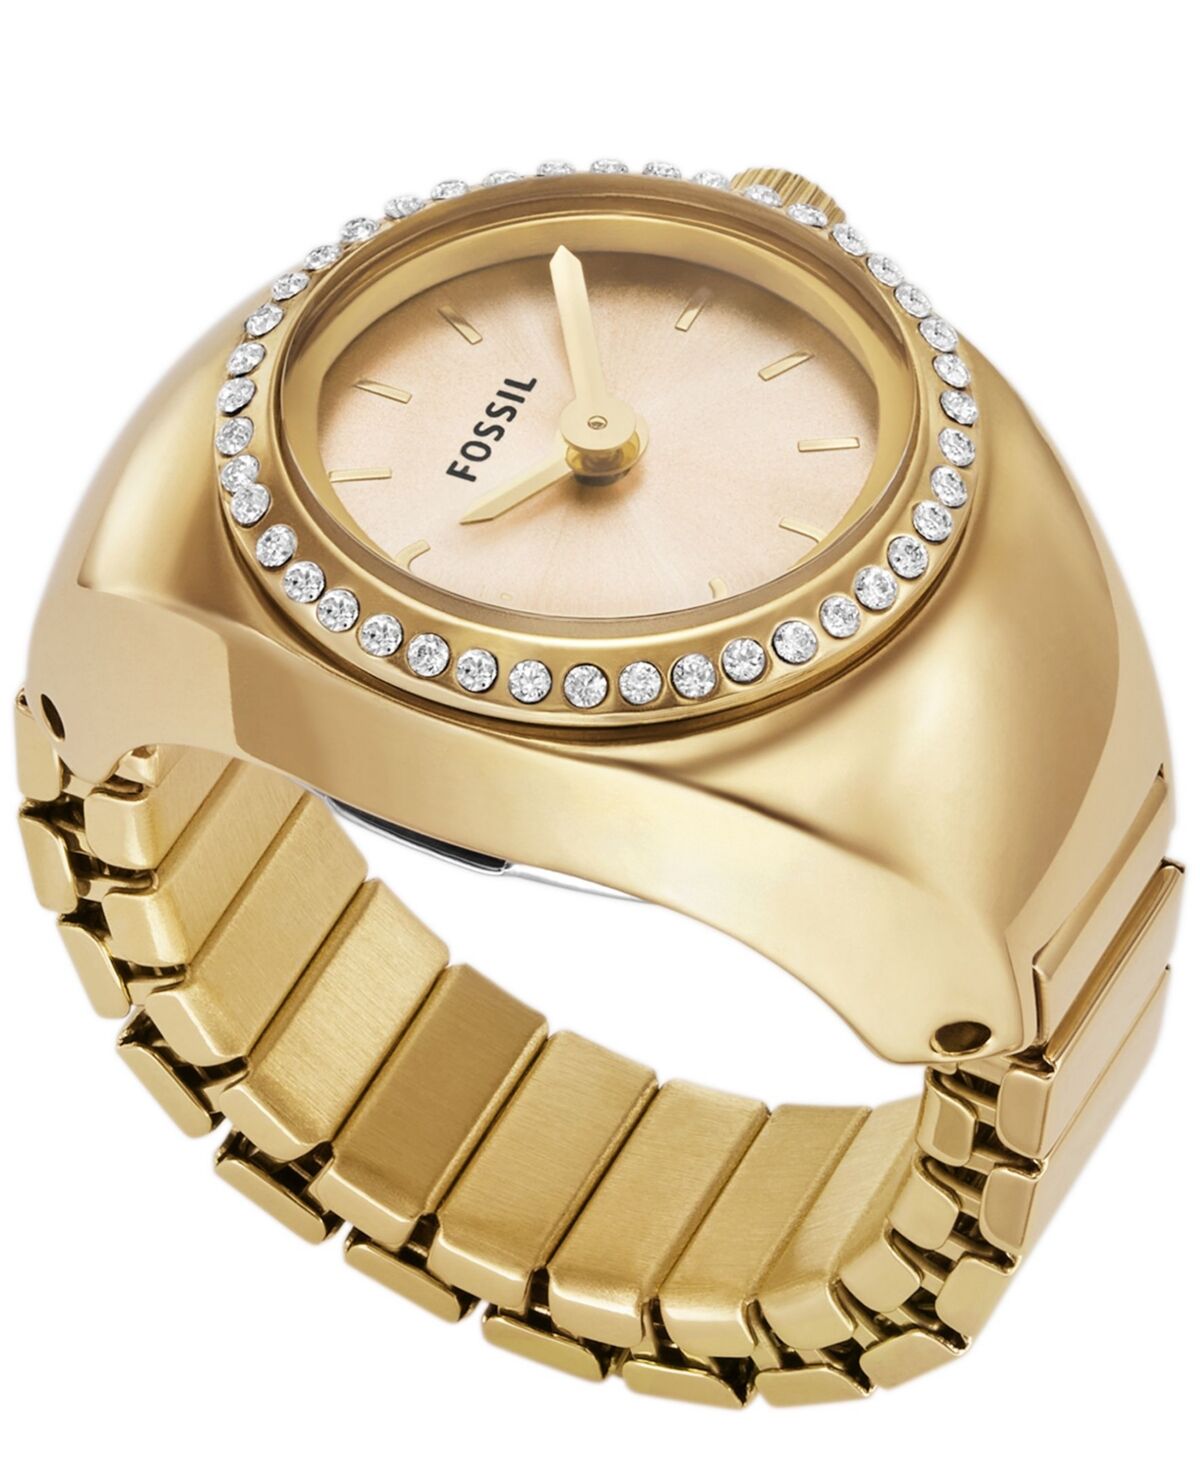 Fossil Women's Watch Ring Two-Hand Gold-Tone Stainless Steel 15mm - Gold-Tone